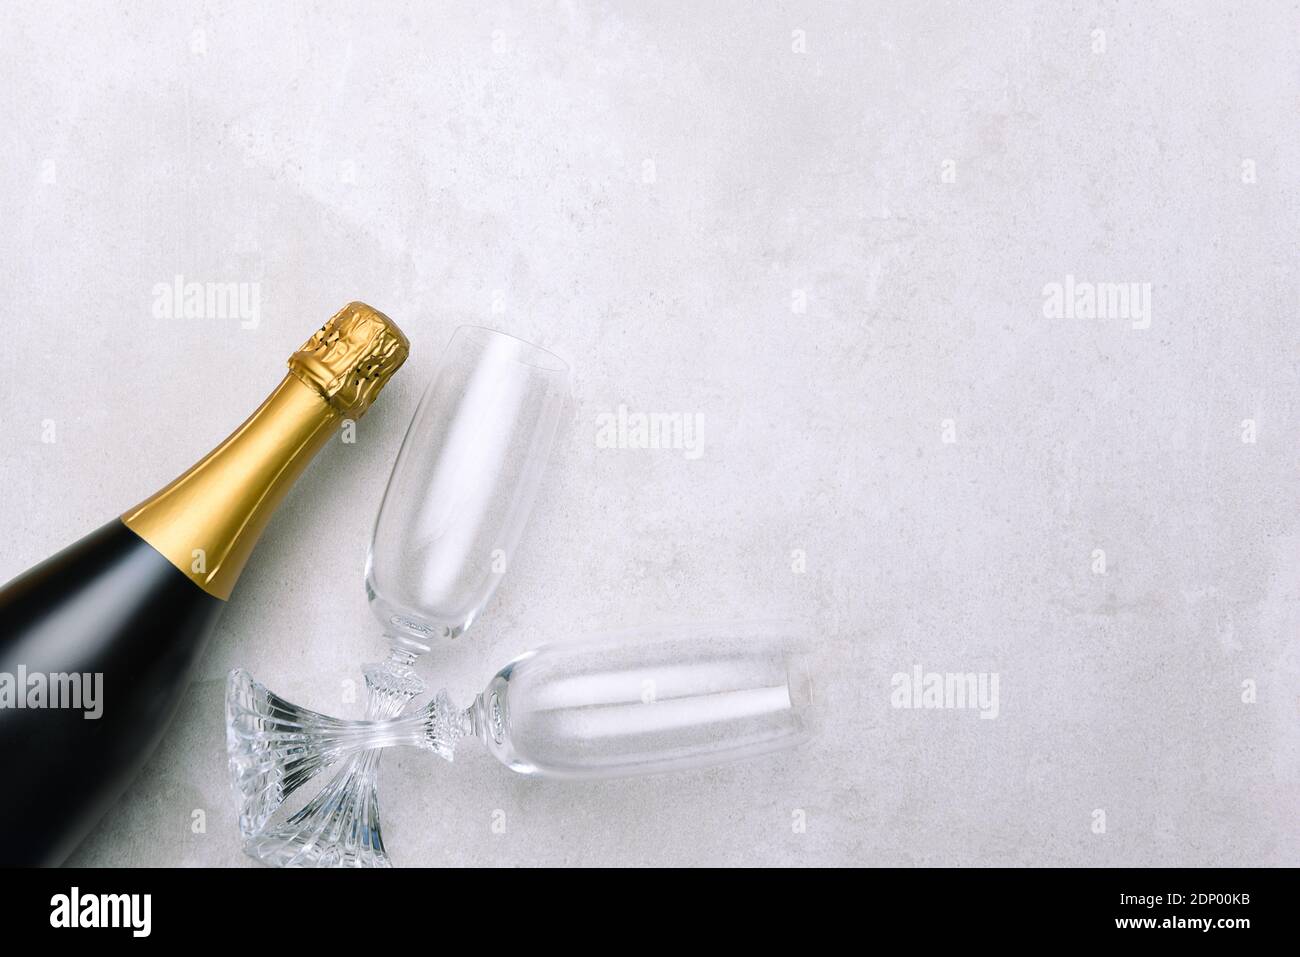 Champagne bottle and glasses on light gray surface. Horizontal format with copy space. Stock Photo